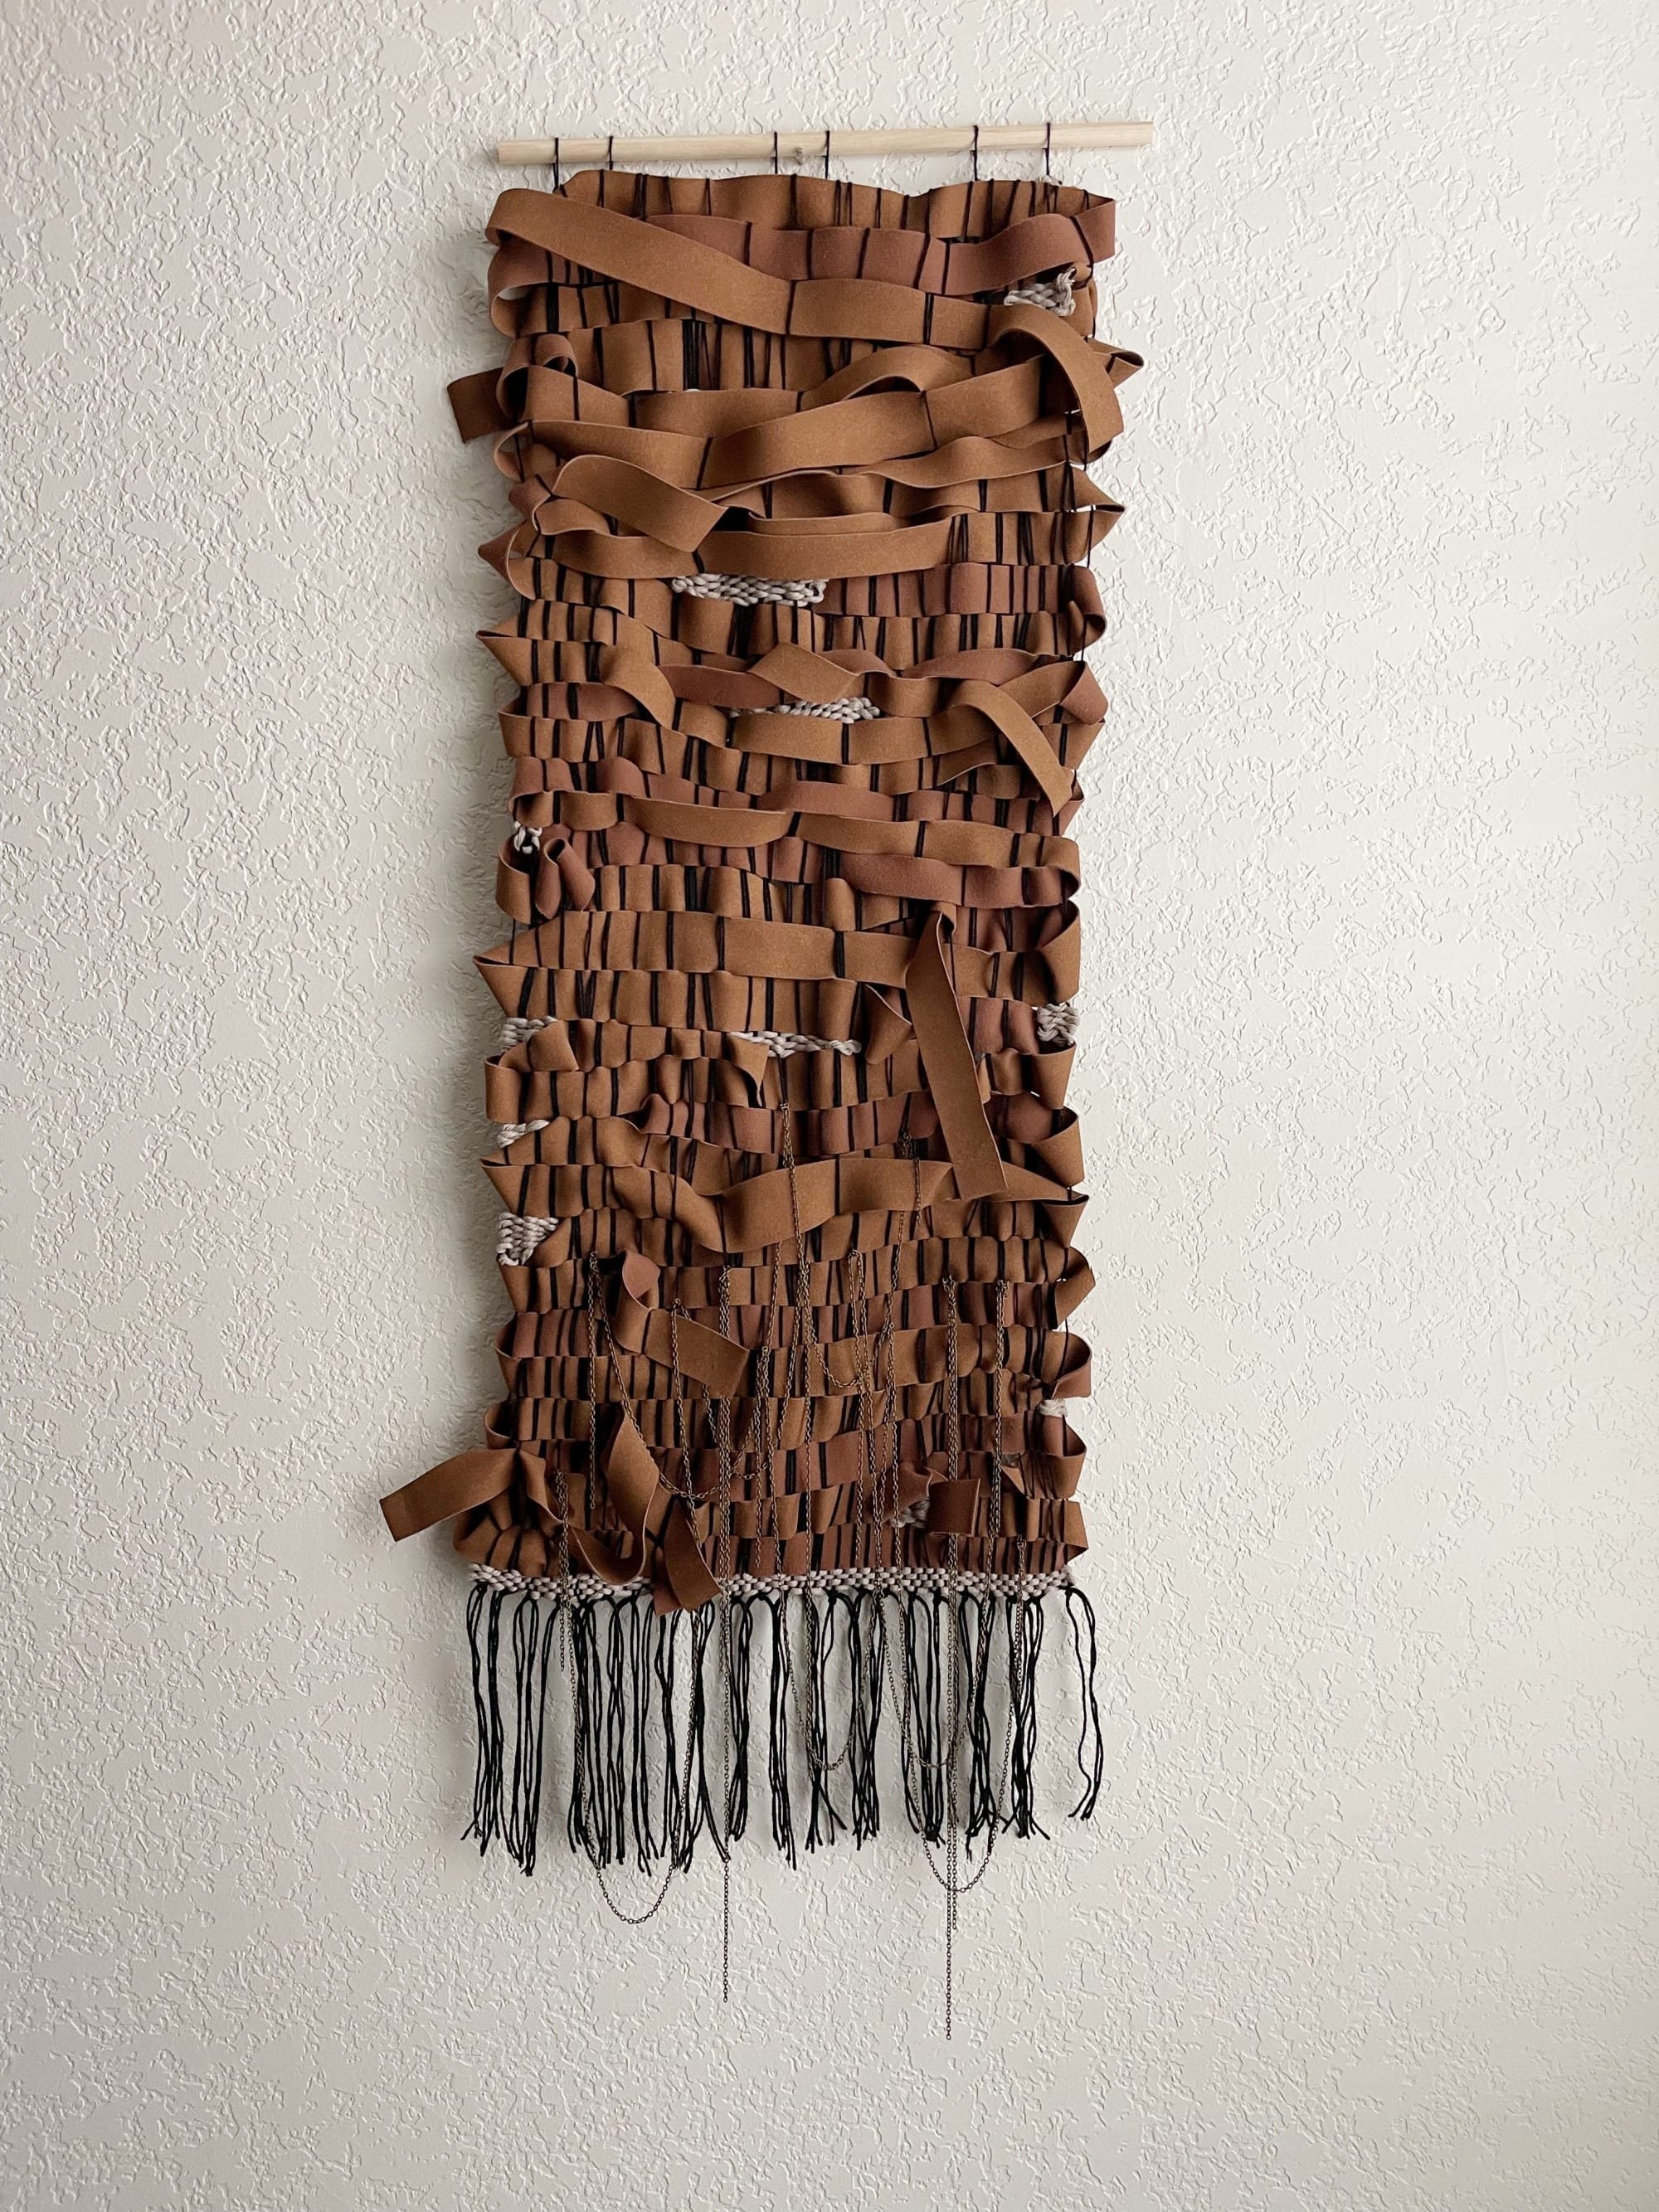 Suede + Chain Wall Hanging